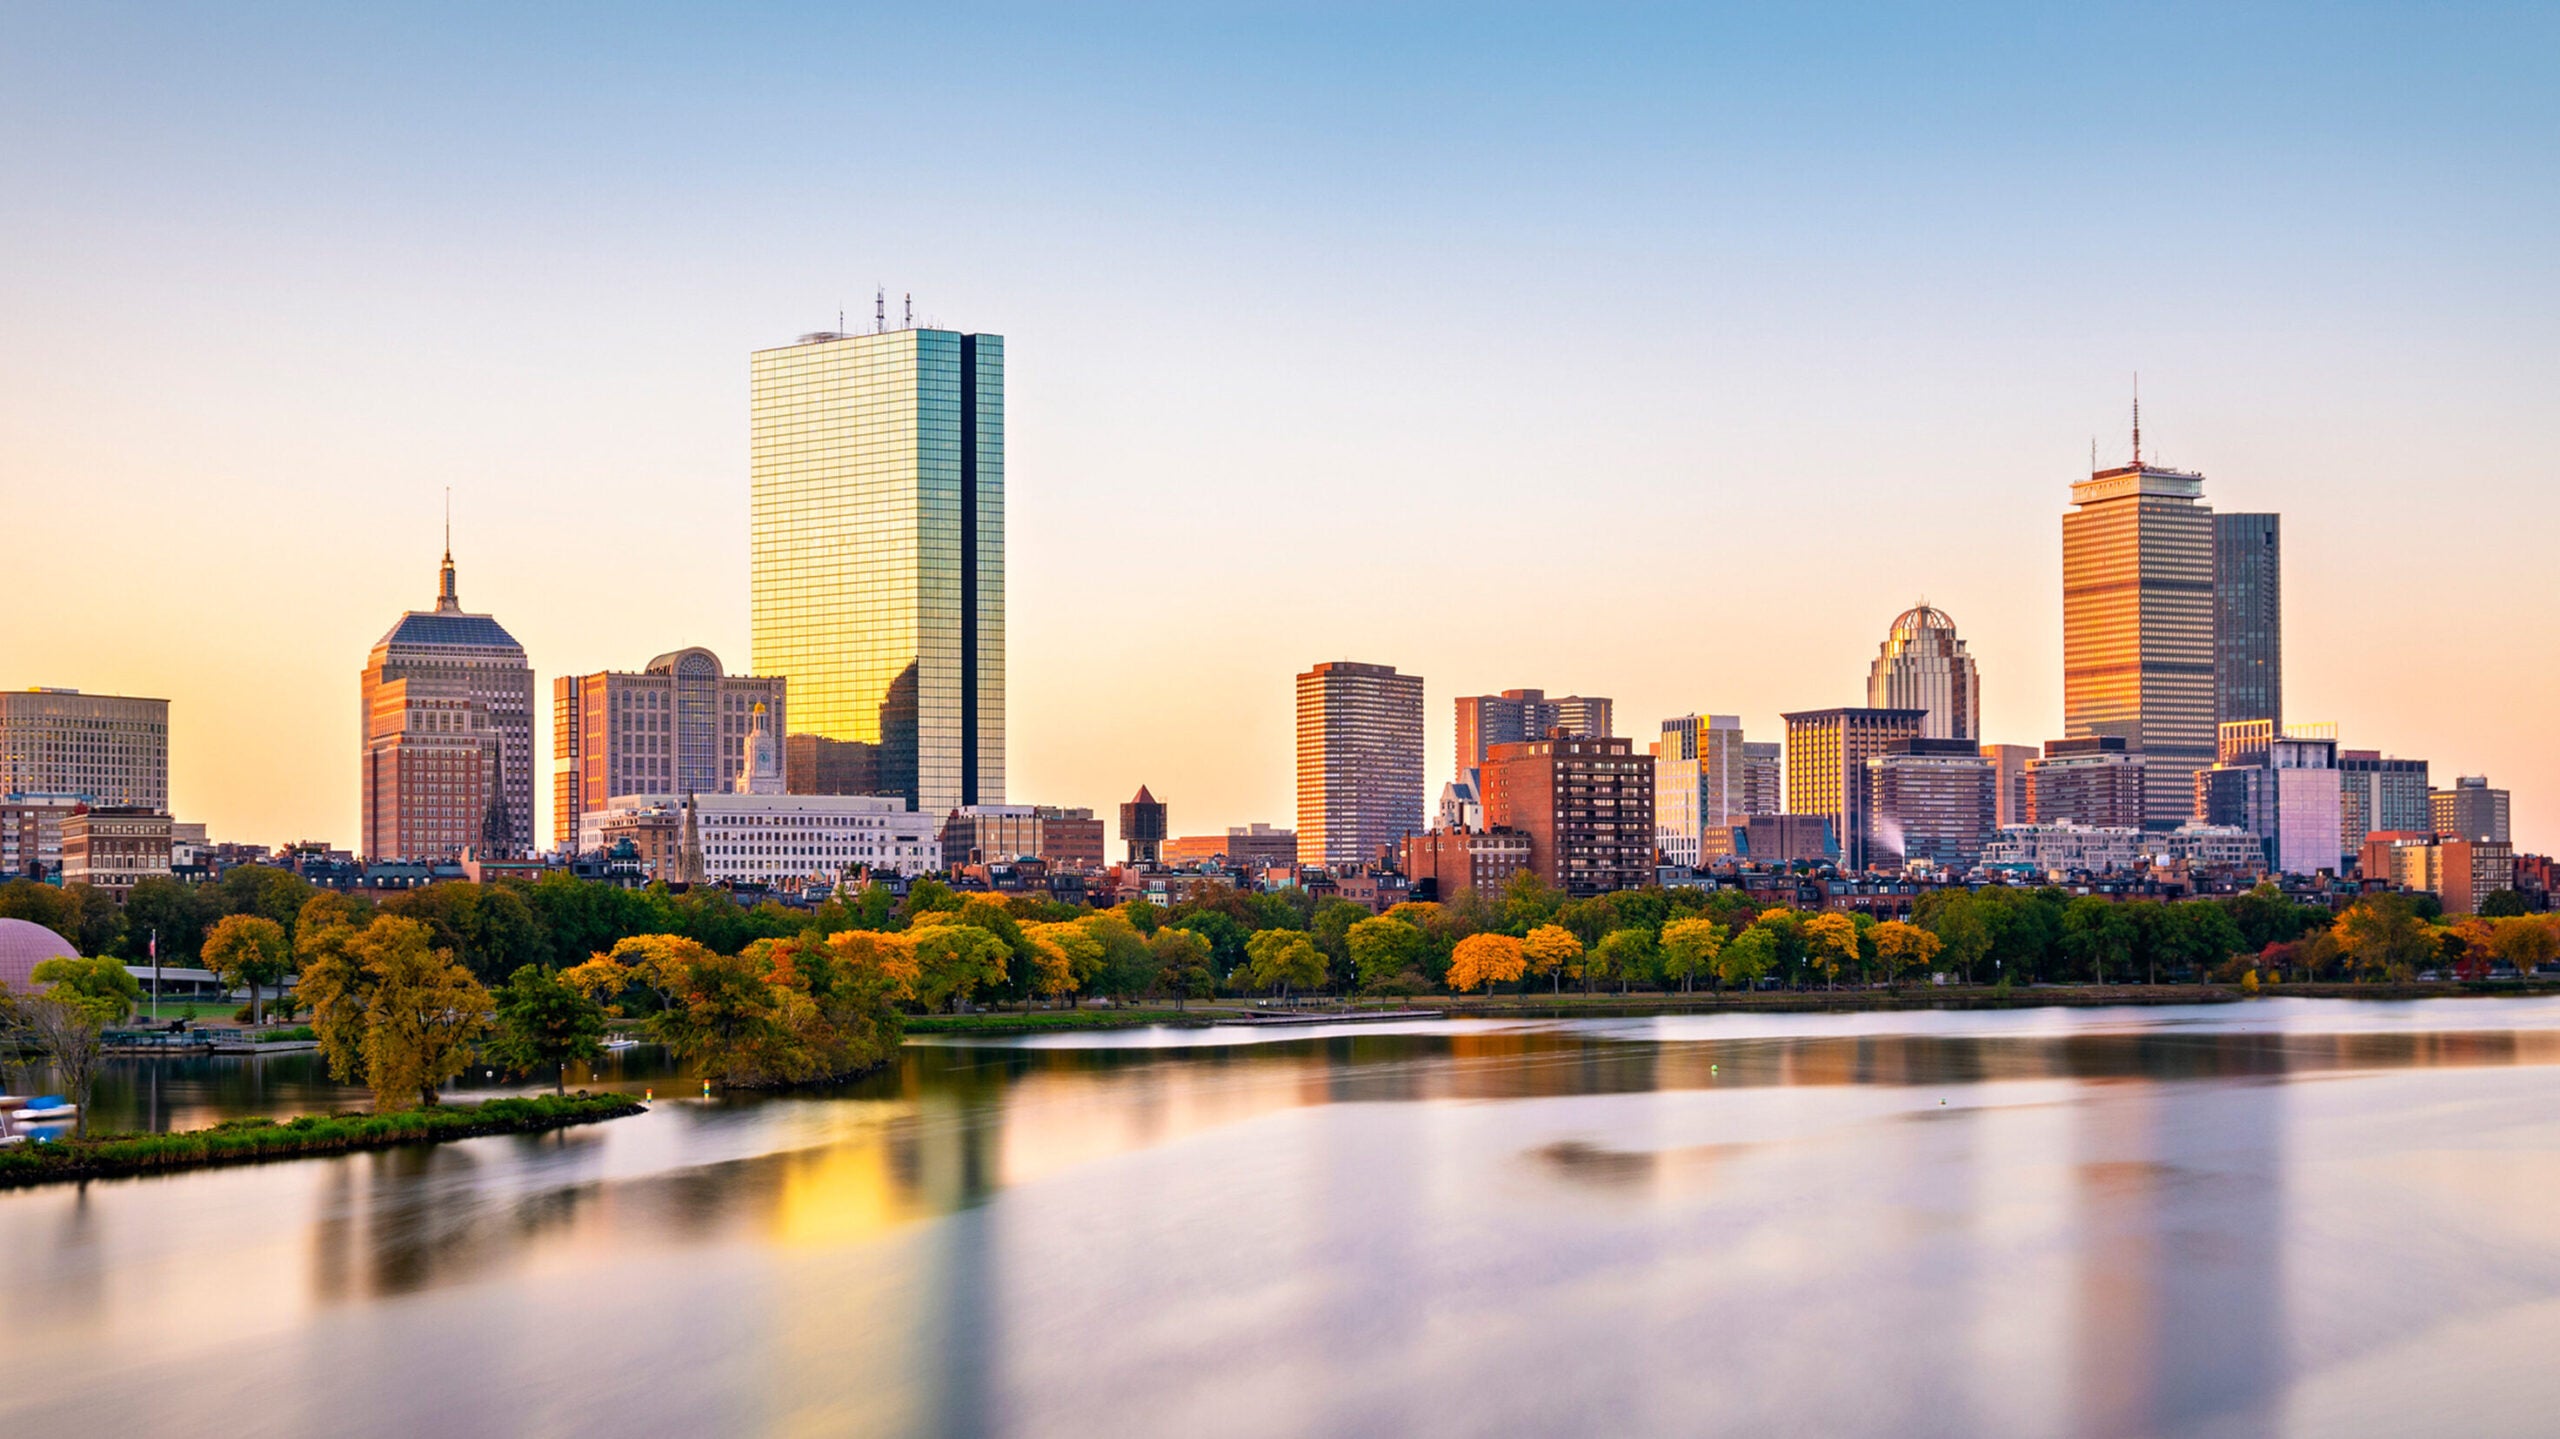 The skyline of Boston at sunset. The Charles river in front of the buildings reflects them onto the water. 